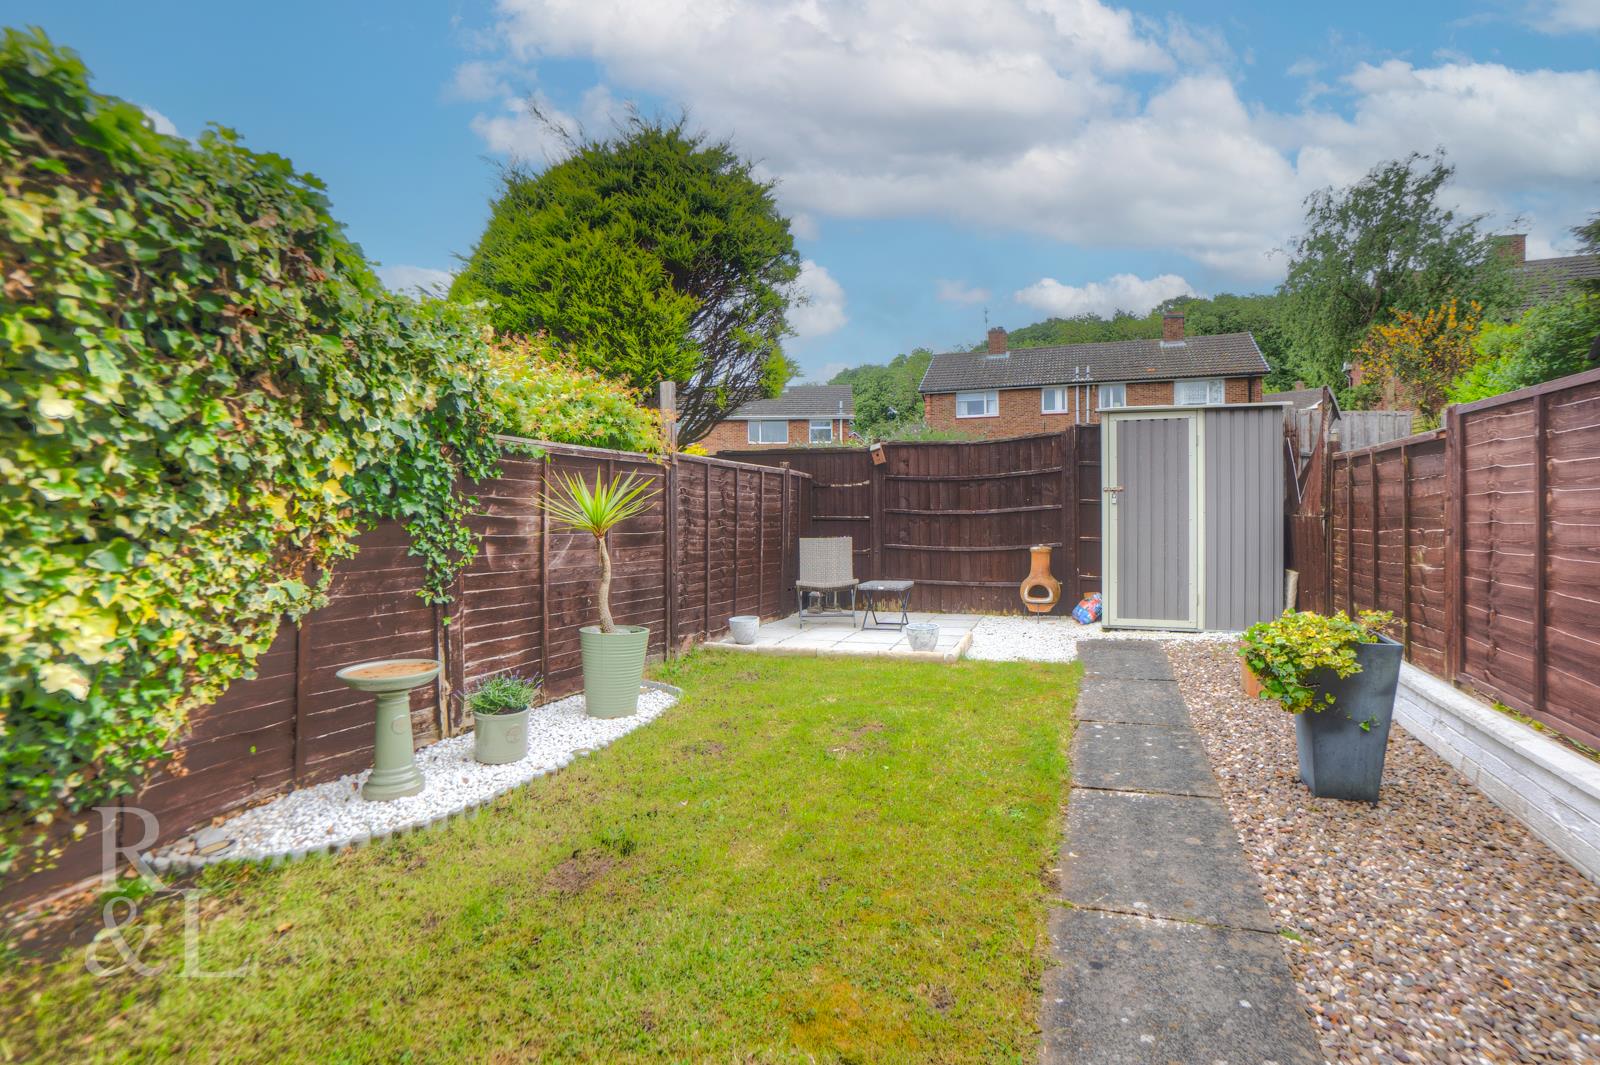 Property image for Thorntons Close, Cotgrave, Nottingham